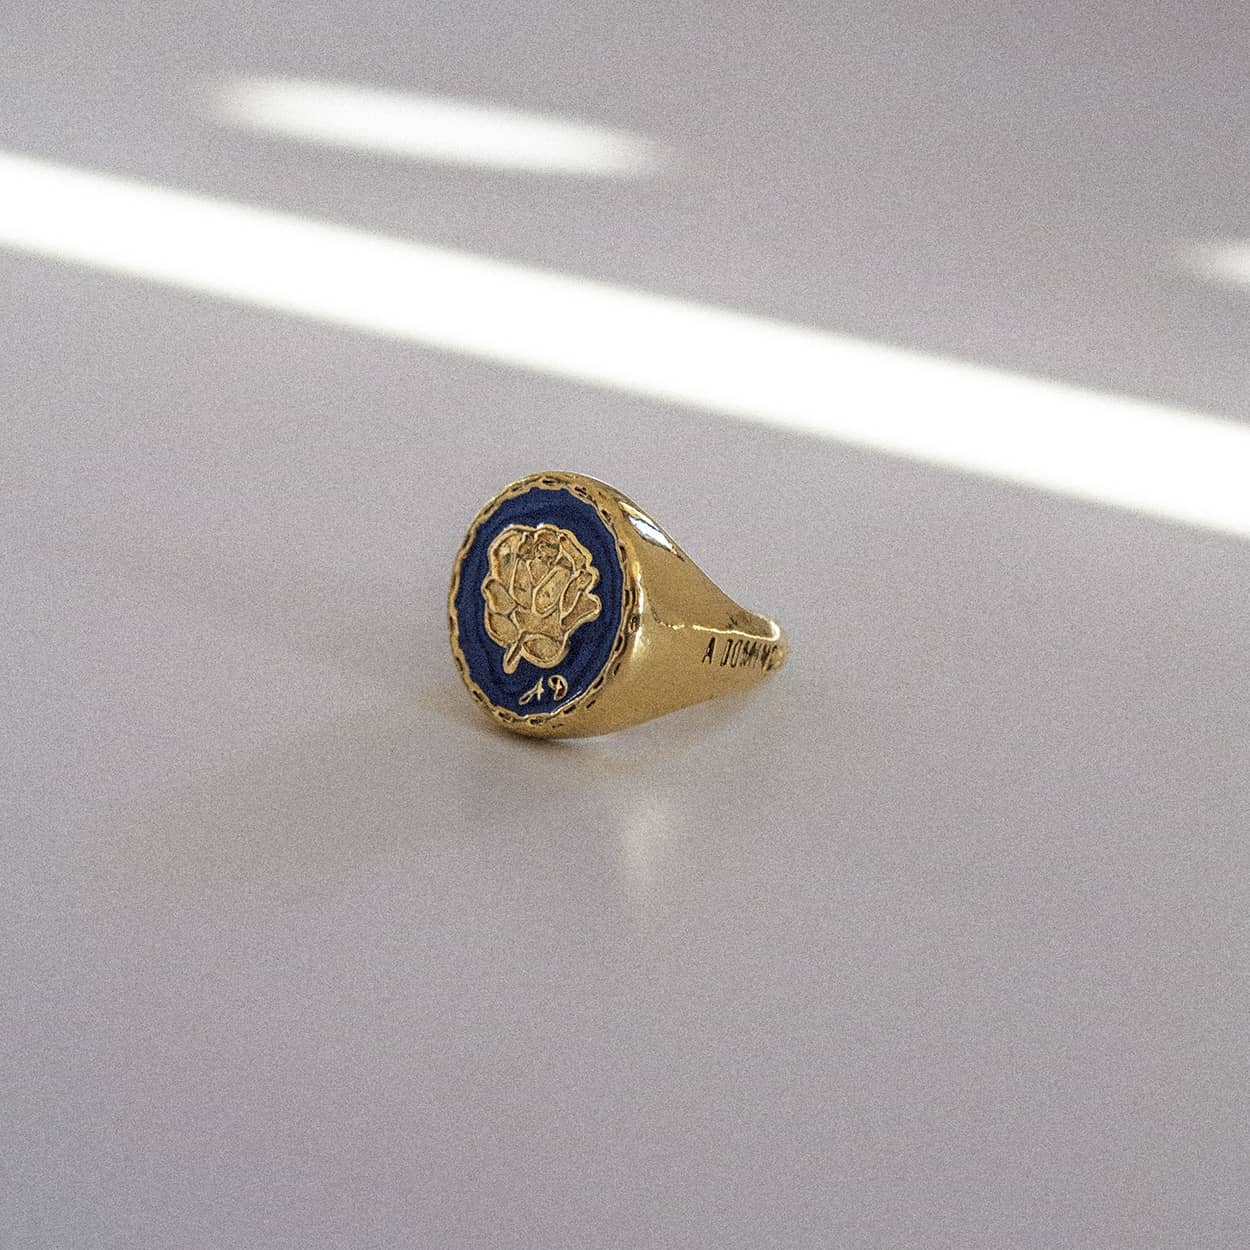 Atelier Domingo's Do's ring is our tribute to the family signet ring. This ring has been designed in France and is made for both men and women. This jewelry is made of a high-quality 24 karat gold plating.